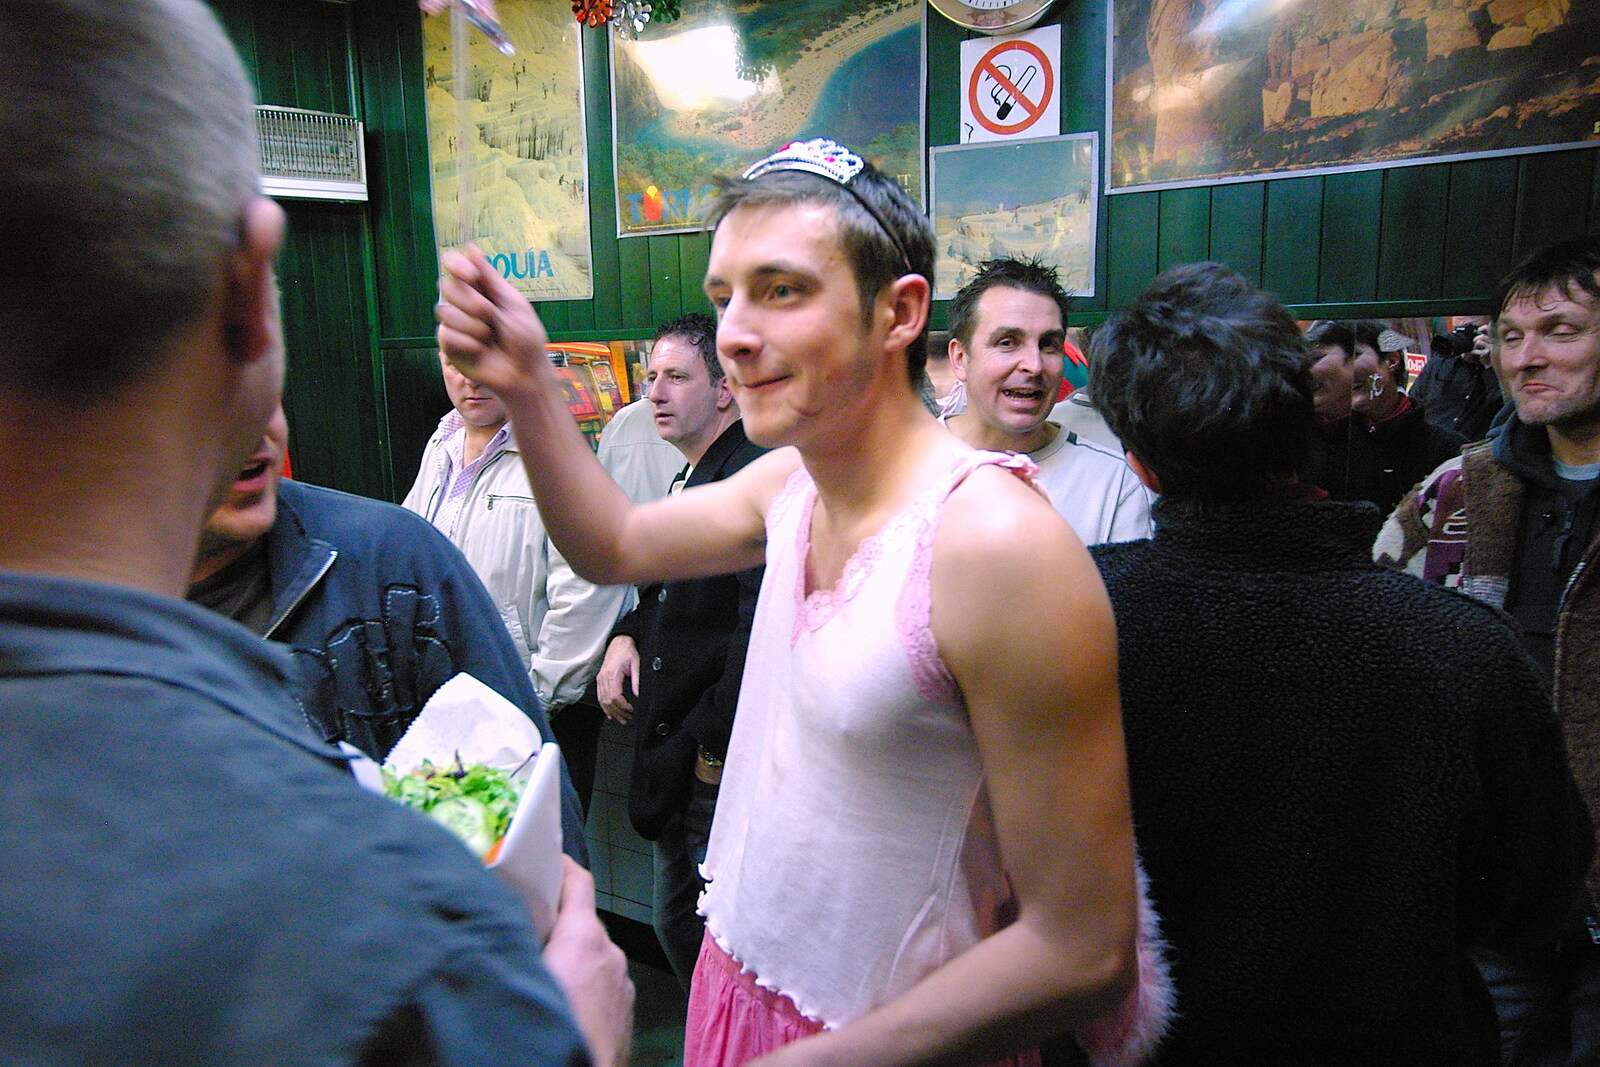 A fancy-dress fairy in the kebab shop from Pre-Christmas Roundup: Wigs, Beers and Kebabs, Diss, Norfolk - 24th December 2005